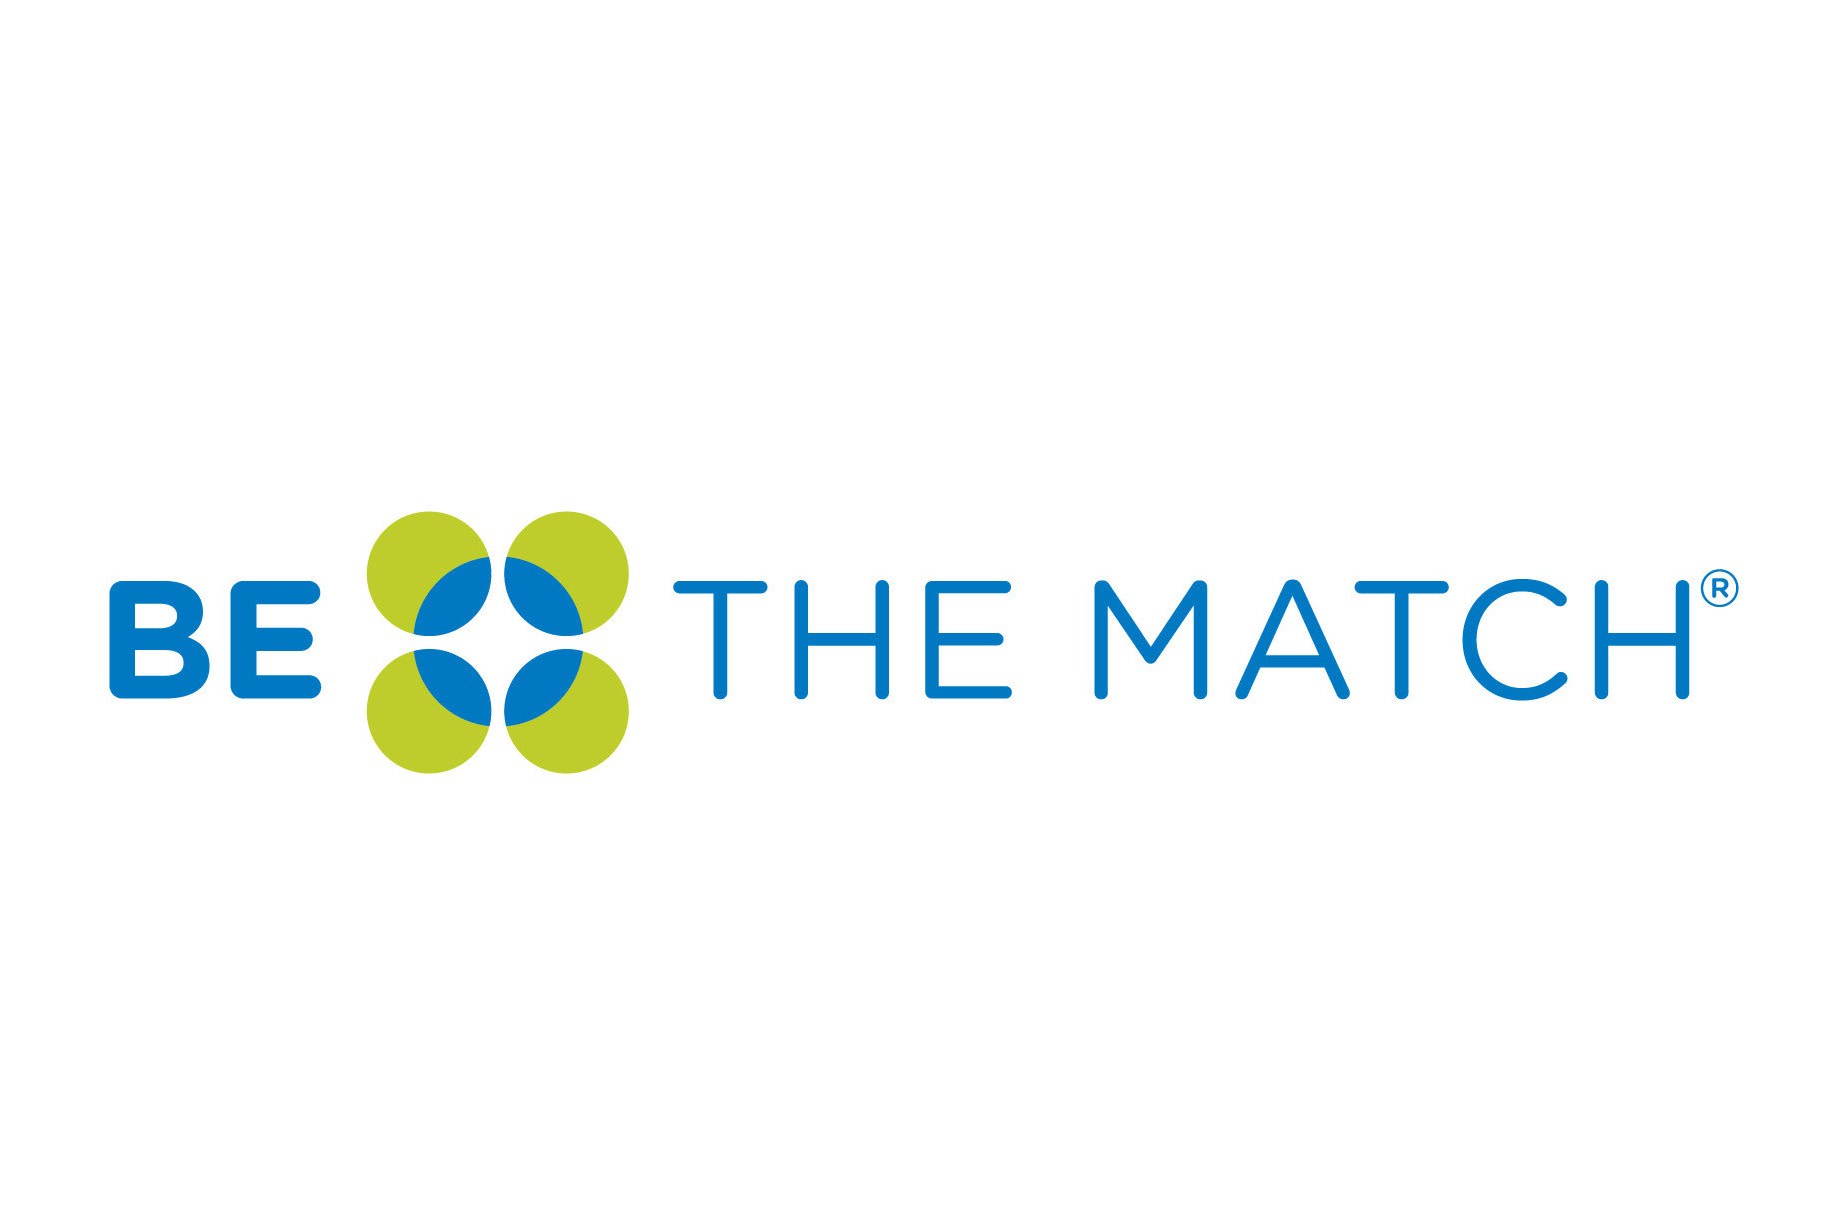 Aflac and Be The Match partner to help diversify the National Blood Stem Cell Donor Registry